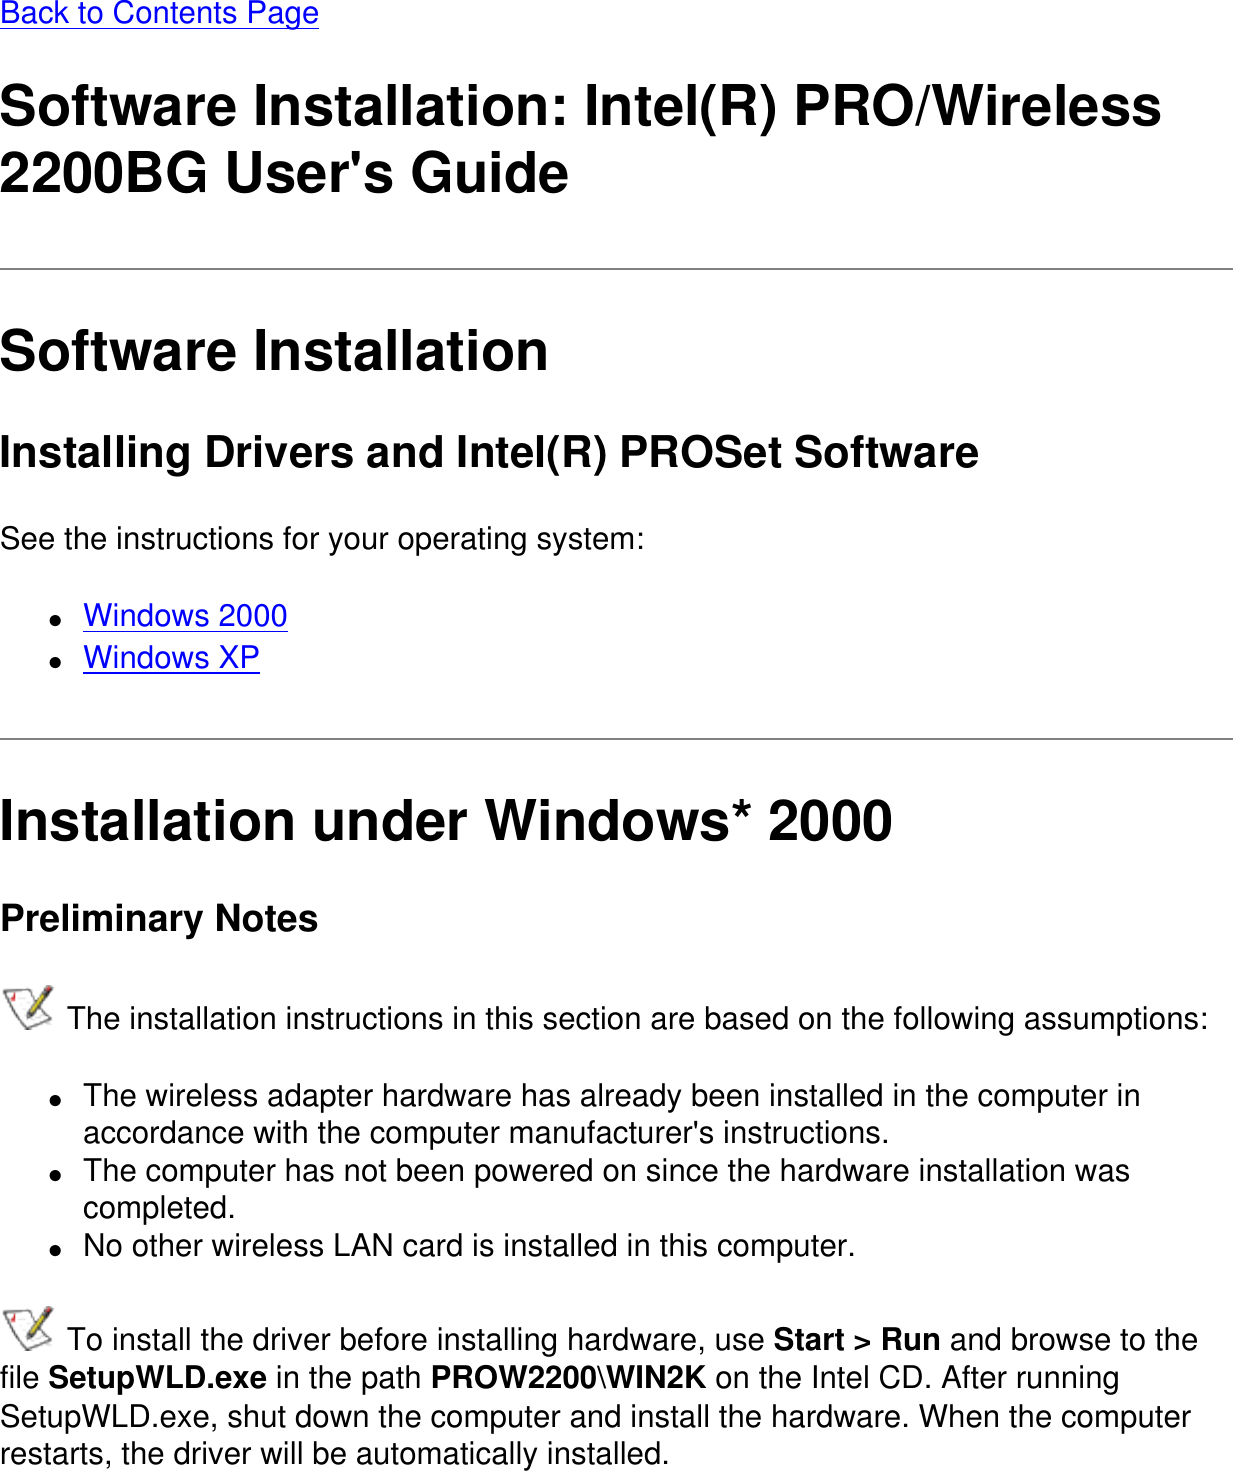 Back to Contents PageSoftware Installation: Intel(R) PRO/Wireless 2200BG User&apos;s GuideSoftware InstallationInstalling Drivers and Intel(R) PROSet SoftwareSee the instructions for your operating system:●     Windows 2000●     Windows XPInstallation under Windows* 2000Preliminary Notes The installation instructions in this section are based on the following assumptions:●     The wireless adapter hardware has already been installed in the computer in accordance with the computer manufacturer&apos;s instructions.●     The computer has not been powered on since the hardware installation was completed.●     No other wireless LAN card is installed in this computer. To install the driver before installing hardware, use Start &gt; Run and browse to the file SetupWLD.exe in the path PROW2200\WIN2K on the Intel CD. After running SetupWLD.exe, shut down the computer and install the hardware. When the computer restarts, the driver will be automatically installed.